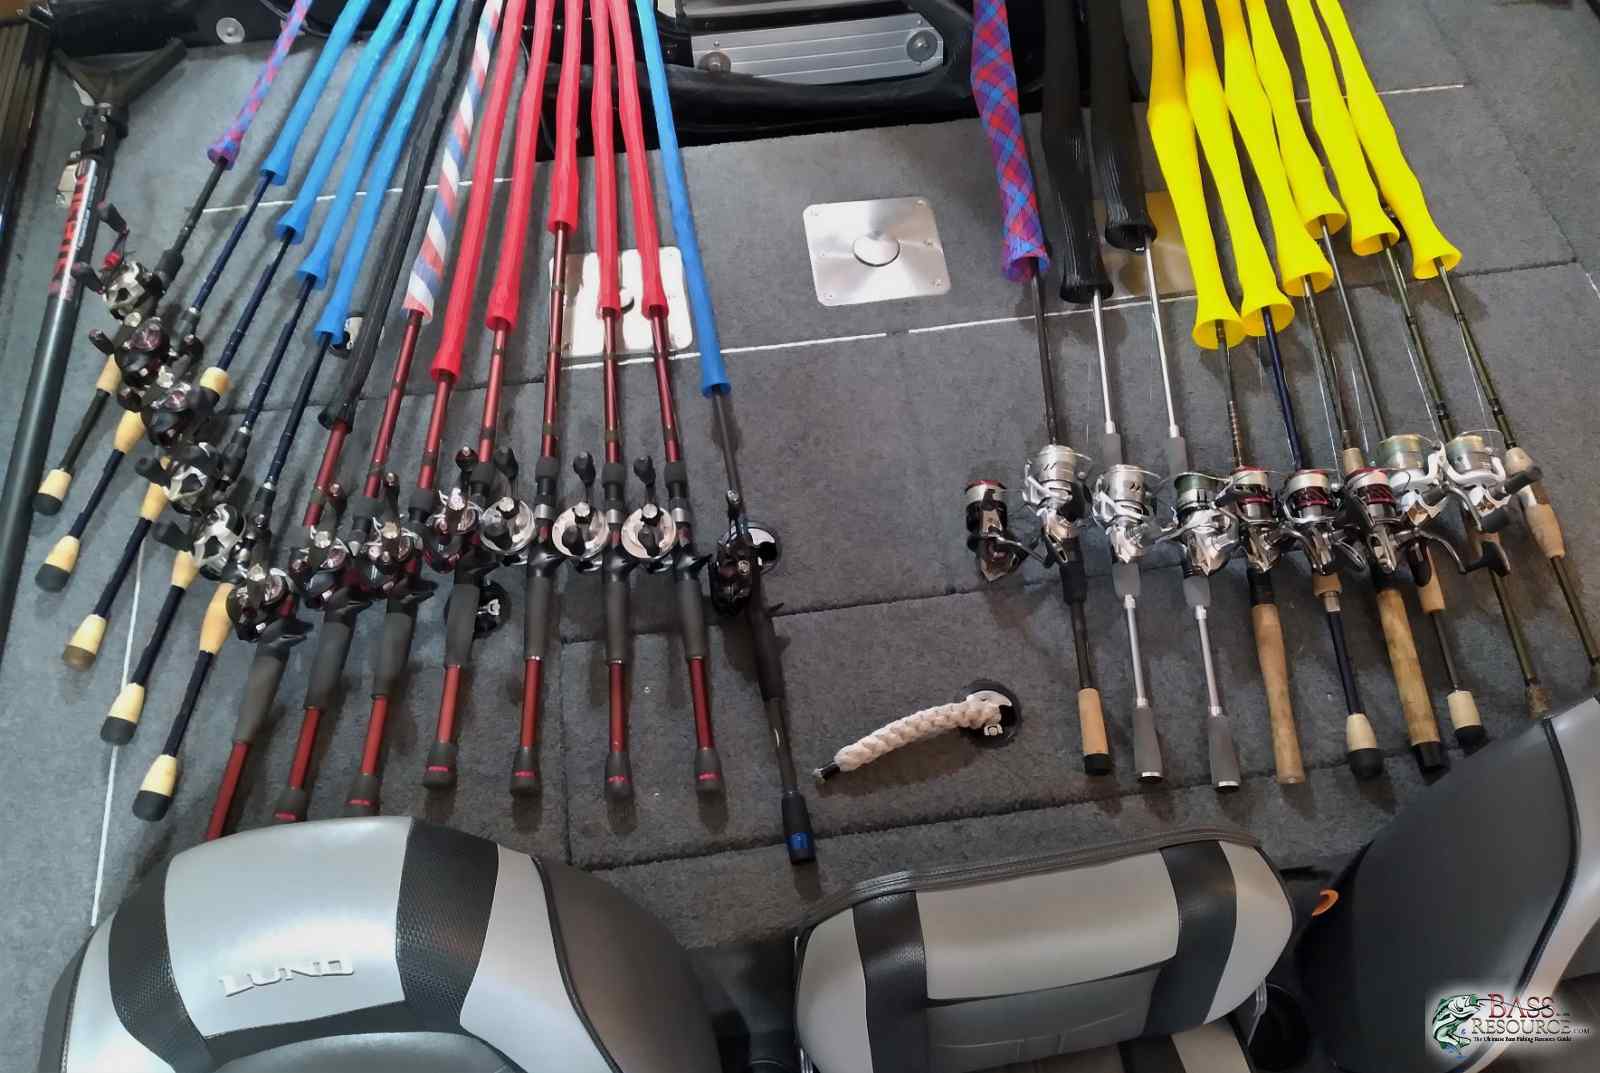 2500 Stradic Fl or Vanford? - Fishing Rods, Reels, Line, and Knots